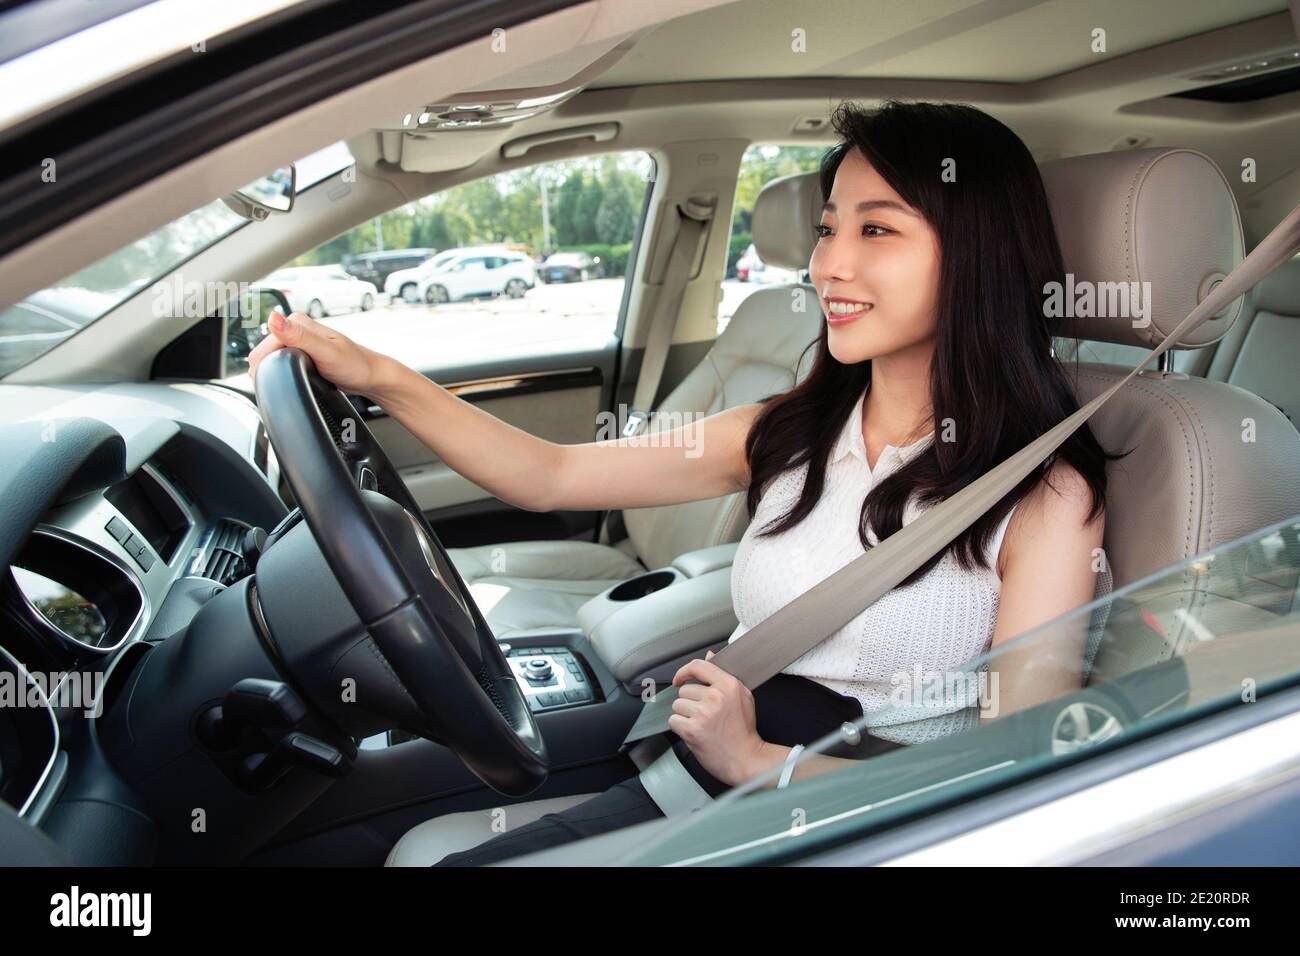 A beautiful young woman driving a car Stock Photo